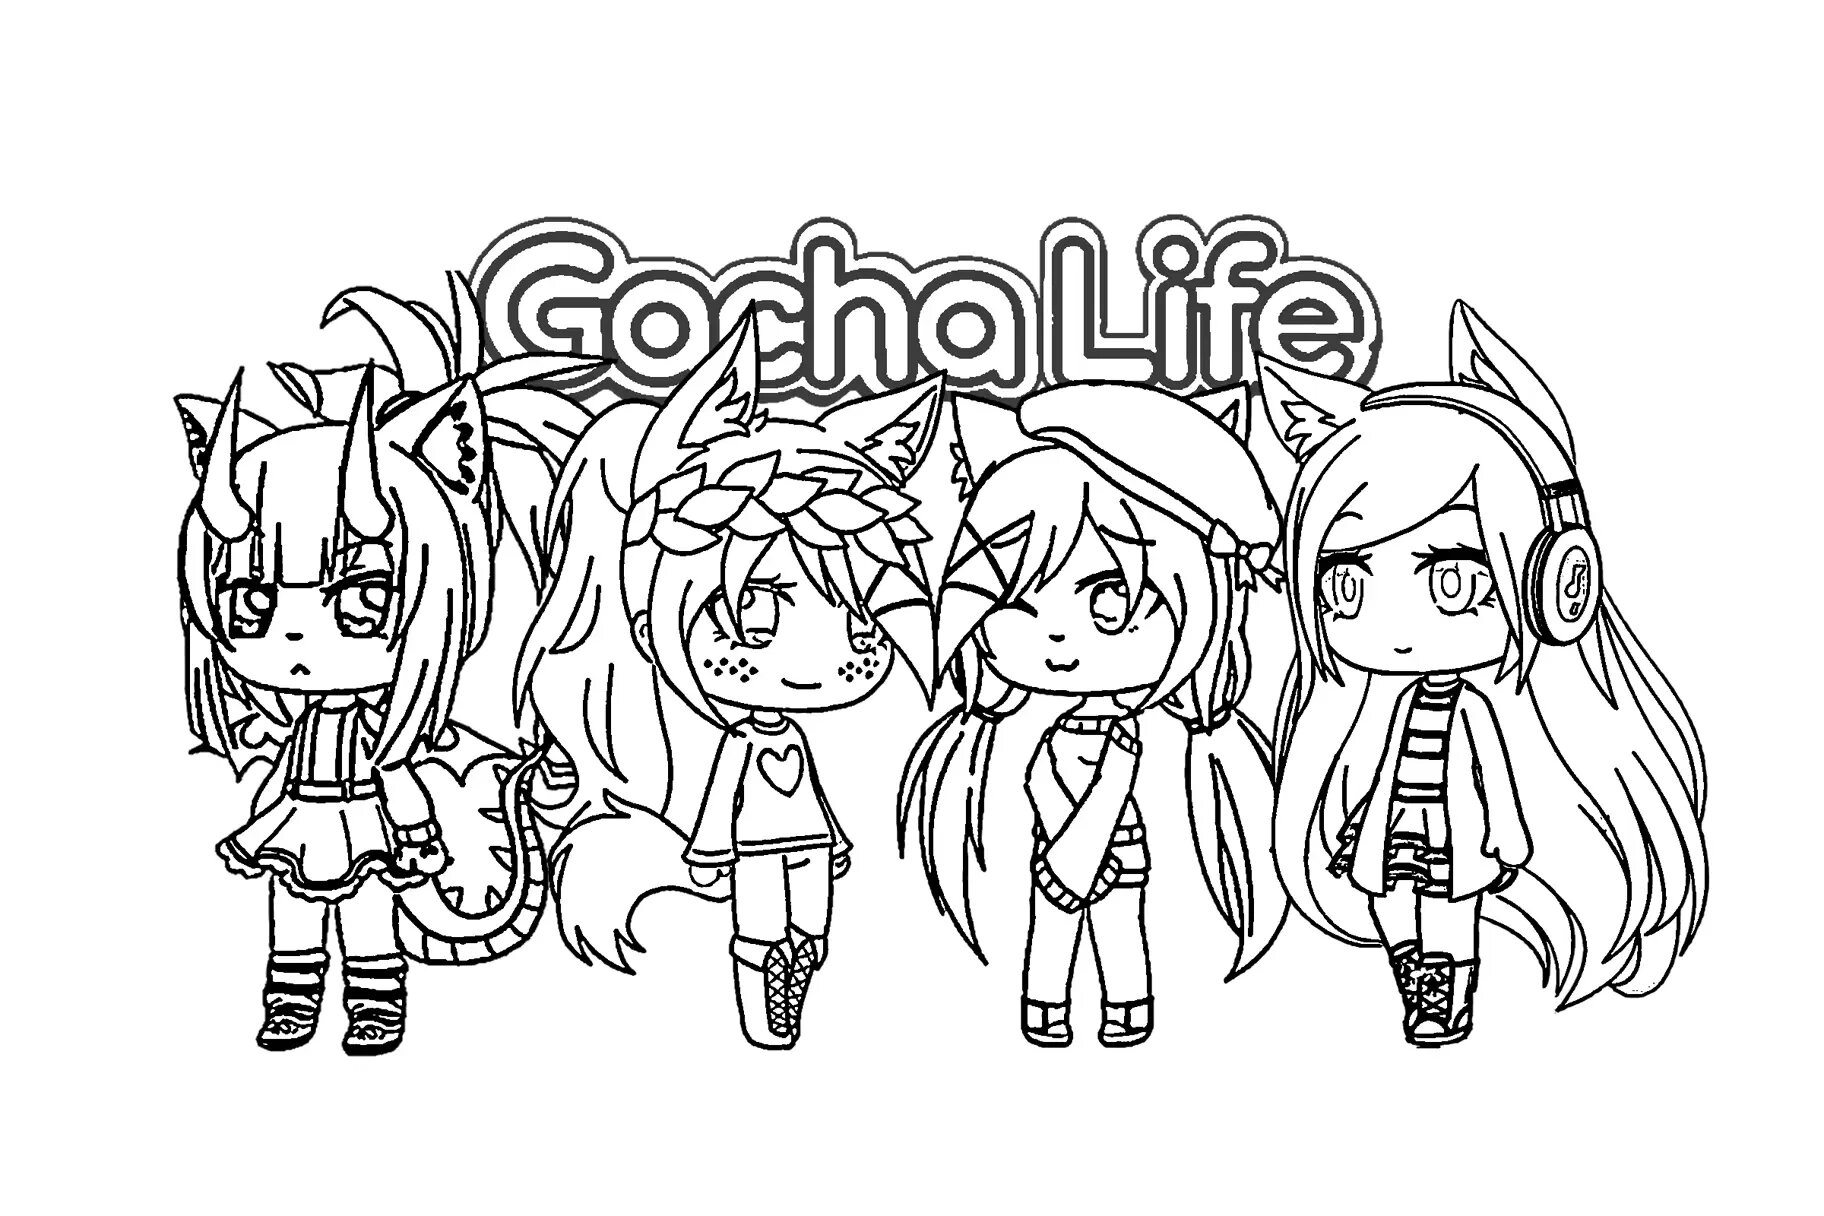 Four Girls in Gacha Life Coloring Page